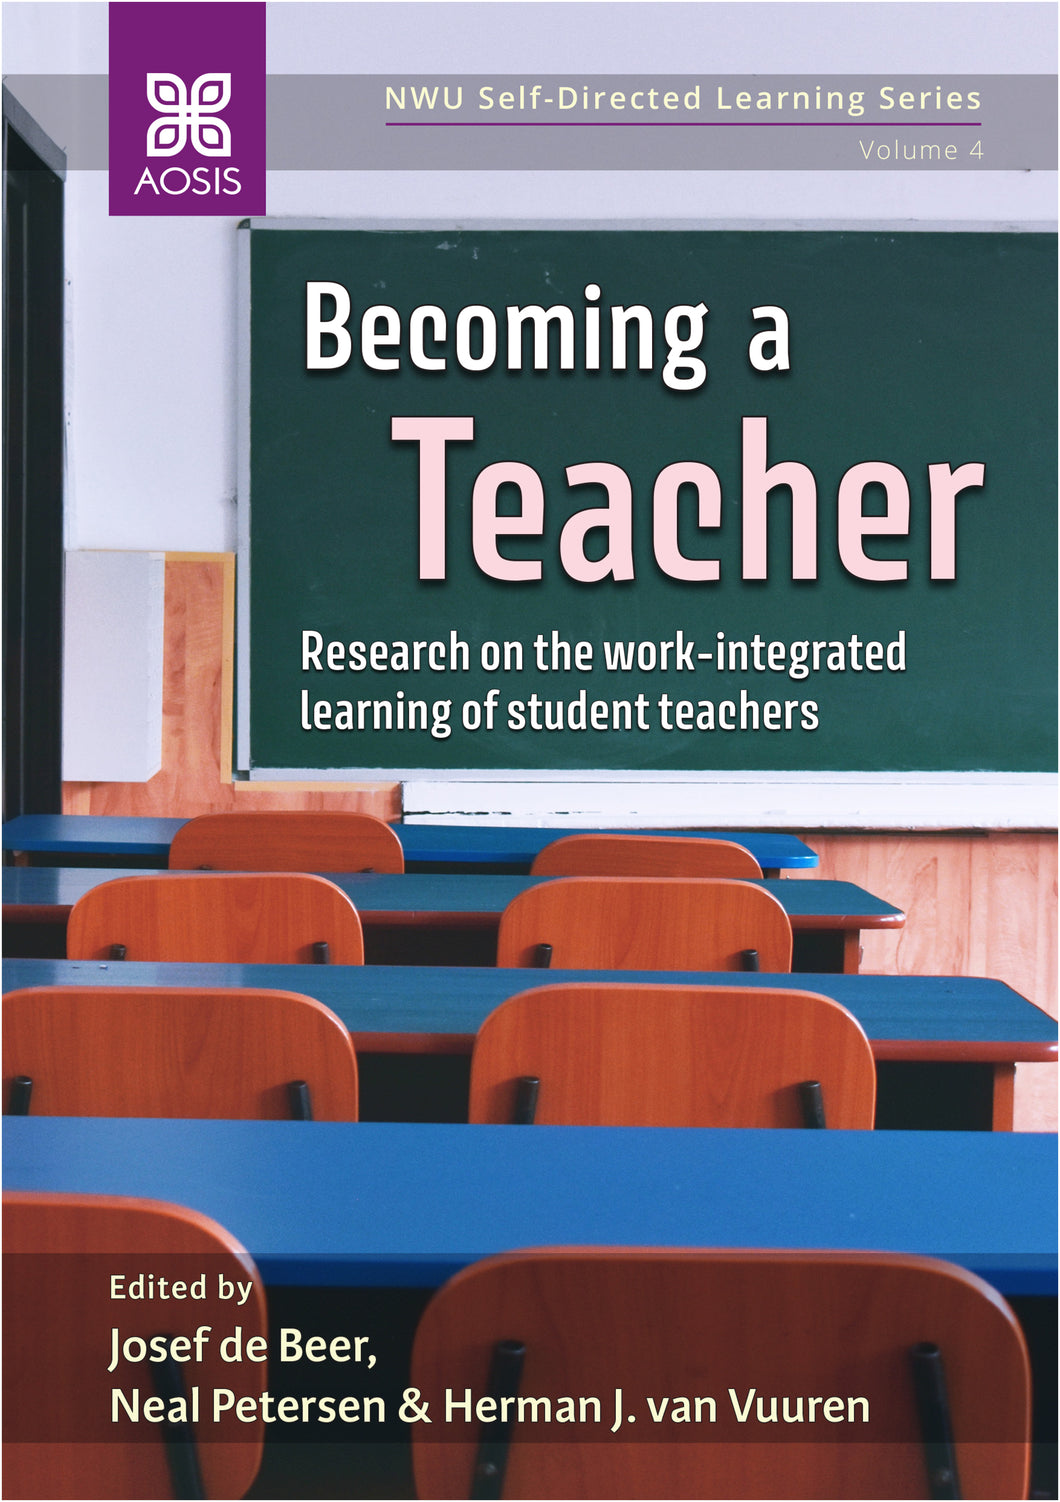 Becoming a teacher: Research on the work-integrated learning of student teachers (ePub Digital Downloads)